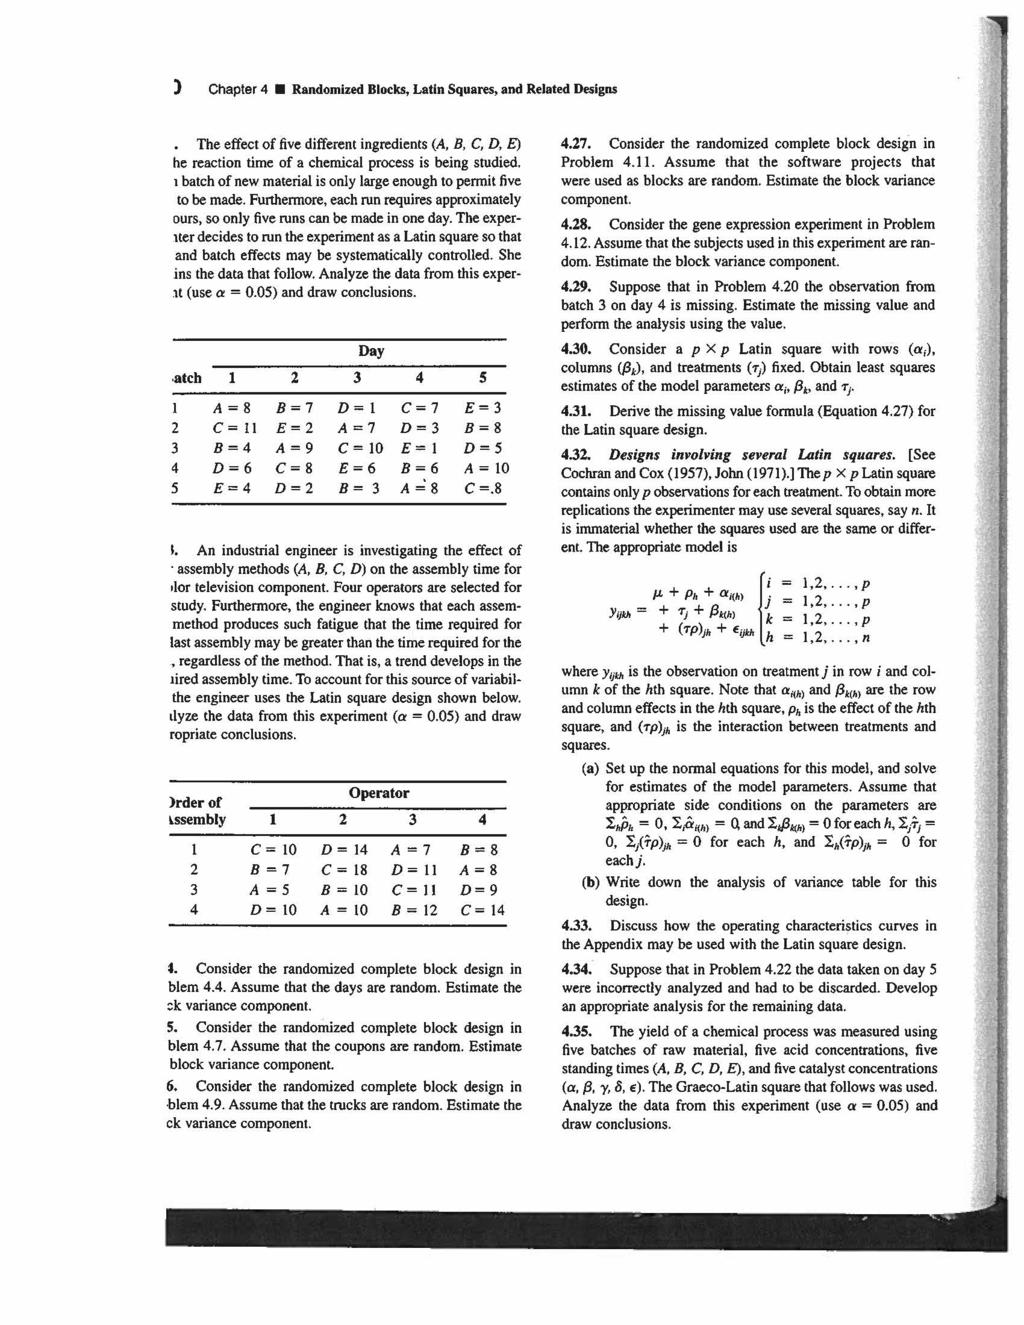 ) Chapter 4 Randomized Blocks, Latin Squares, and Related Designs The effect of five different ingredients (A, B, C, D, E) he reaction time of a chemical process is being studied.